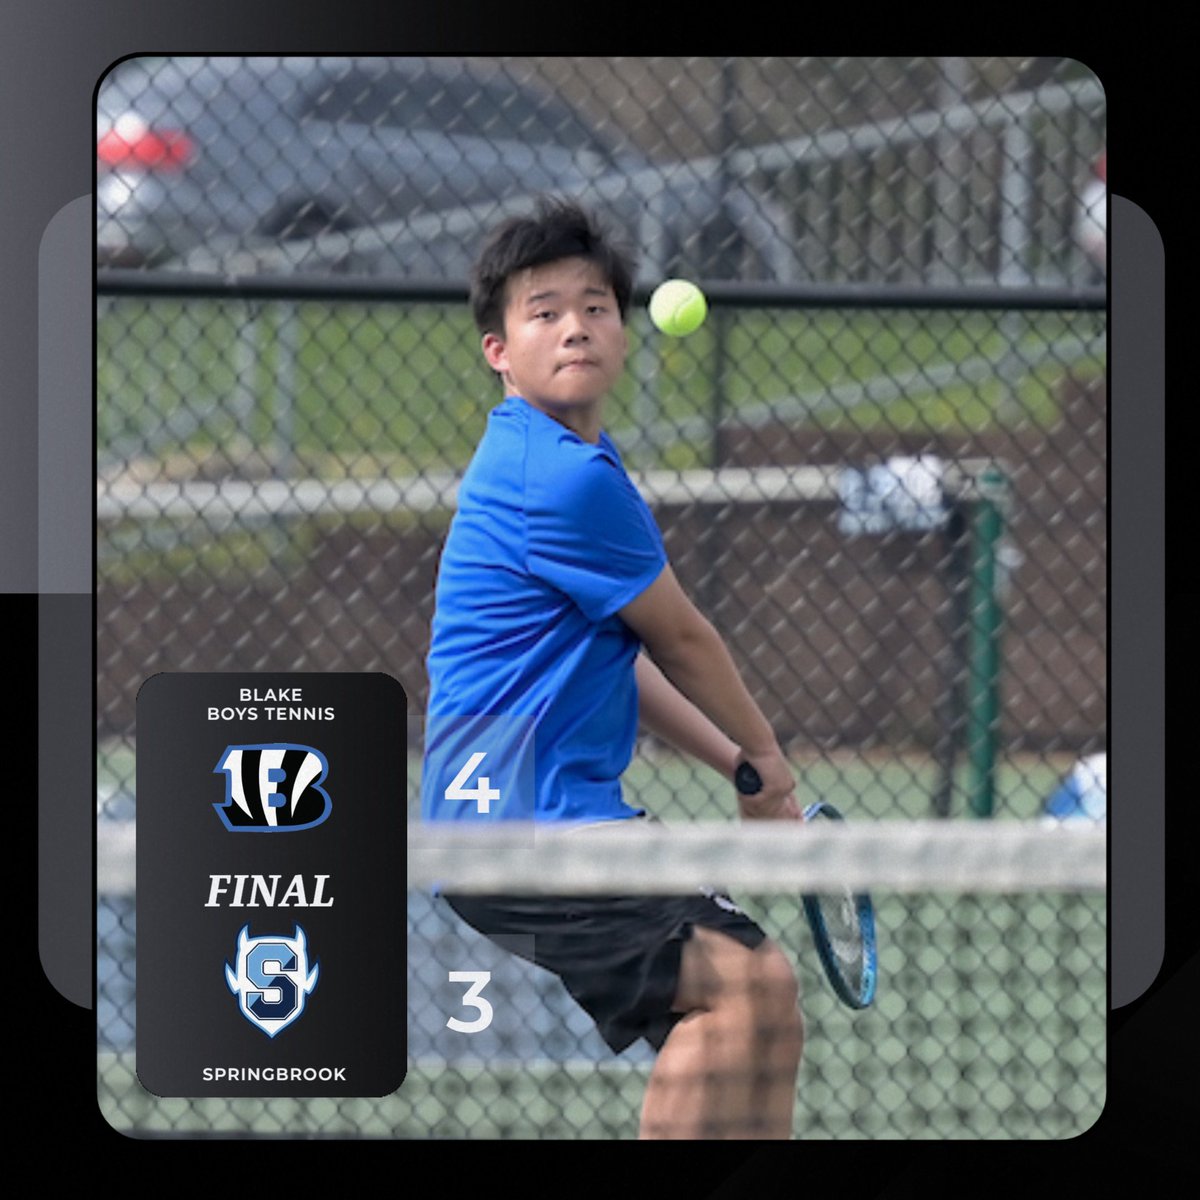 Congrats to Boys Tennis for the team's 4-3 victory over Springbrook today!